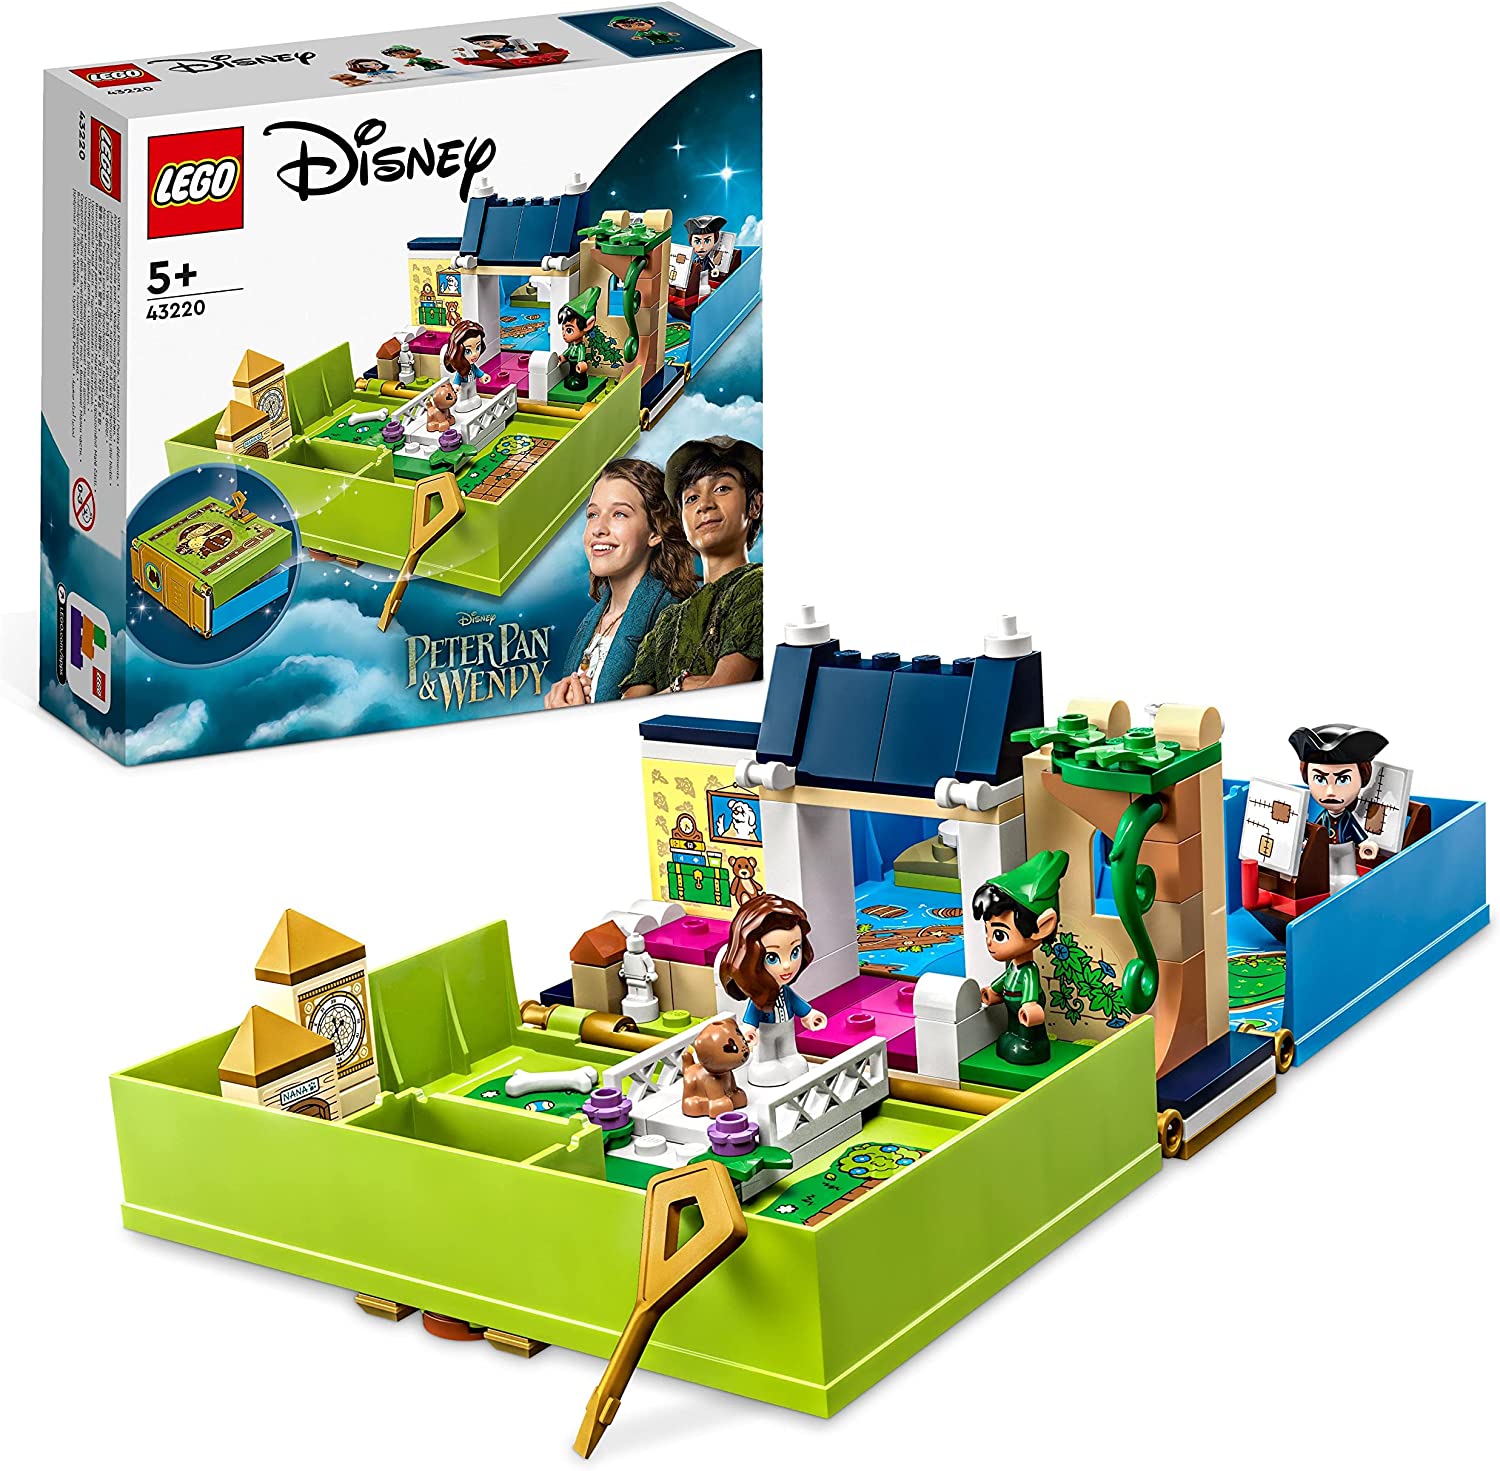 LEGO 43220 Disney Classic Peter Pan & Wendy - Fairytale Book Adventure Toy Set, Portable Playset With Micro Dolls and Pirate Ship, Travel Toy for Children from 5 Years